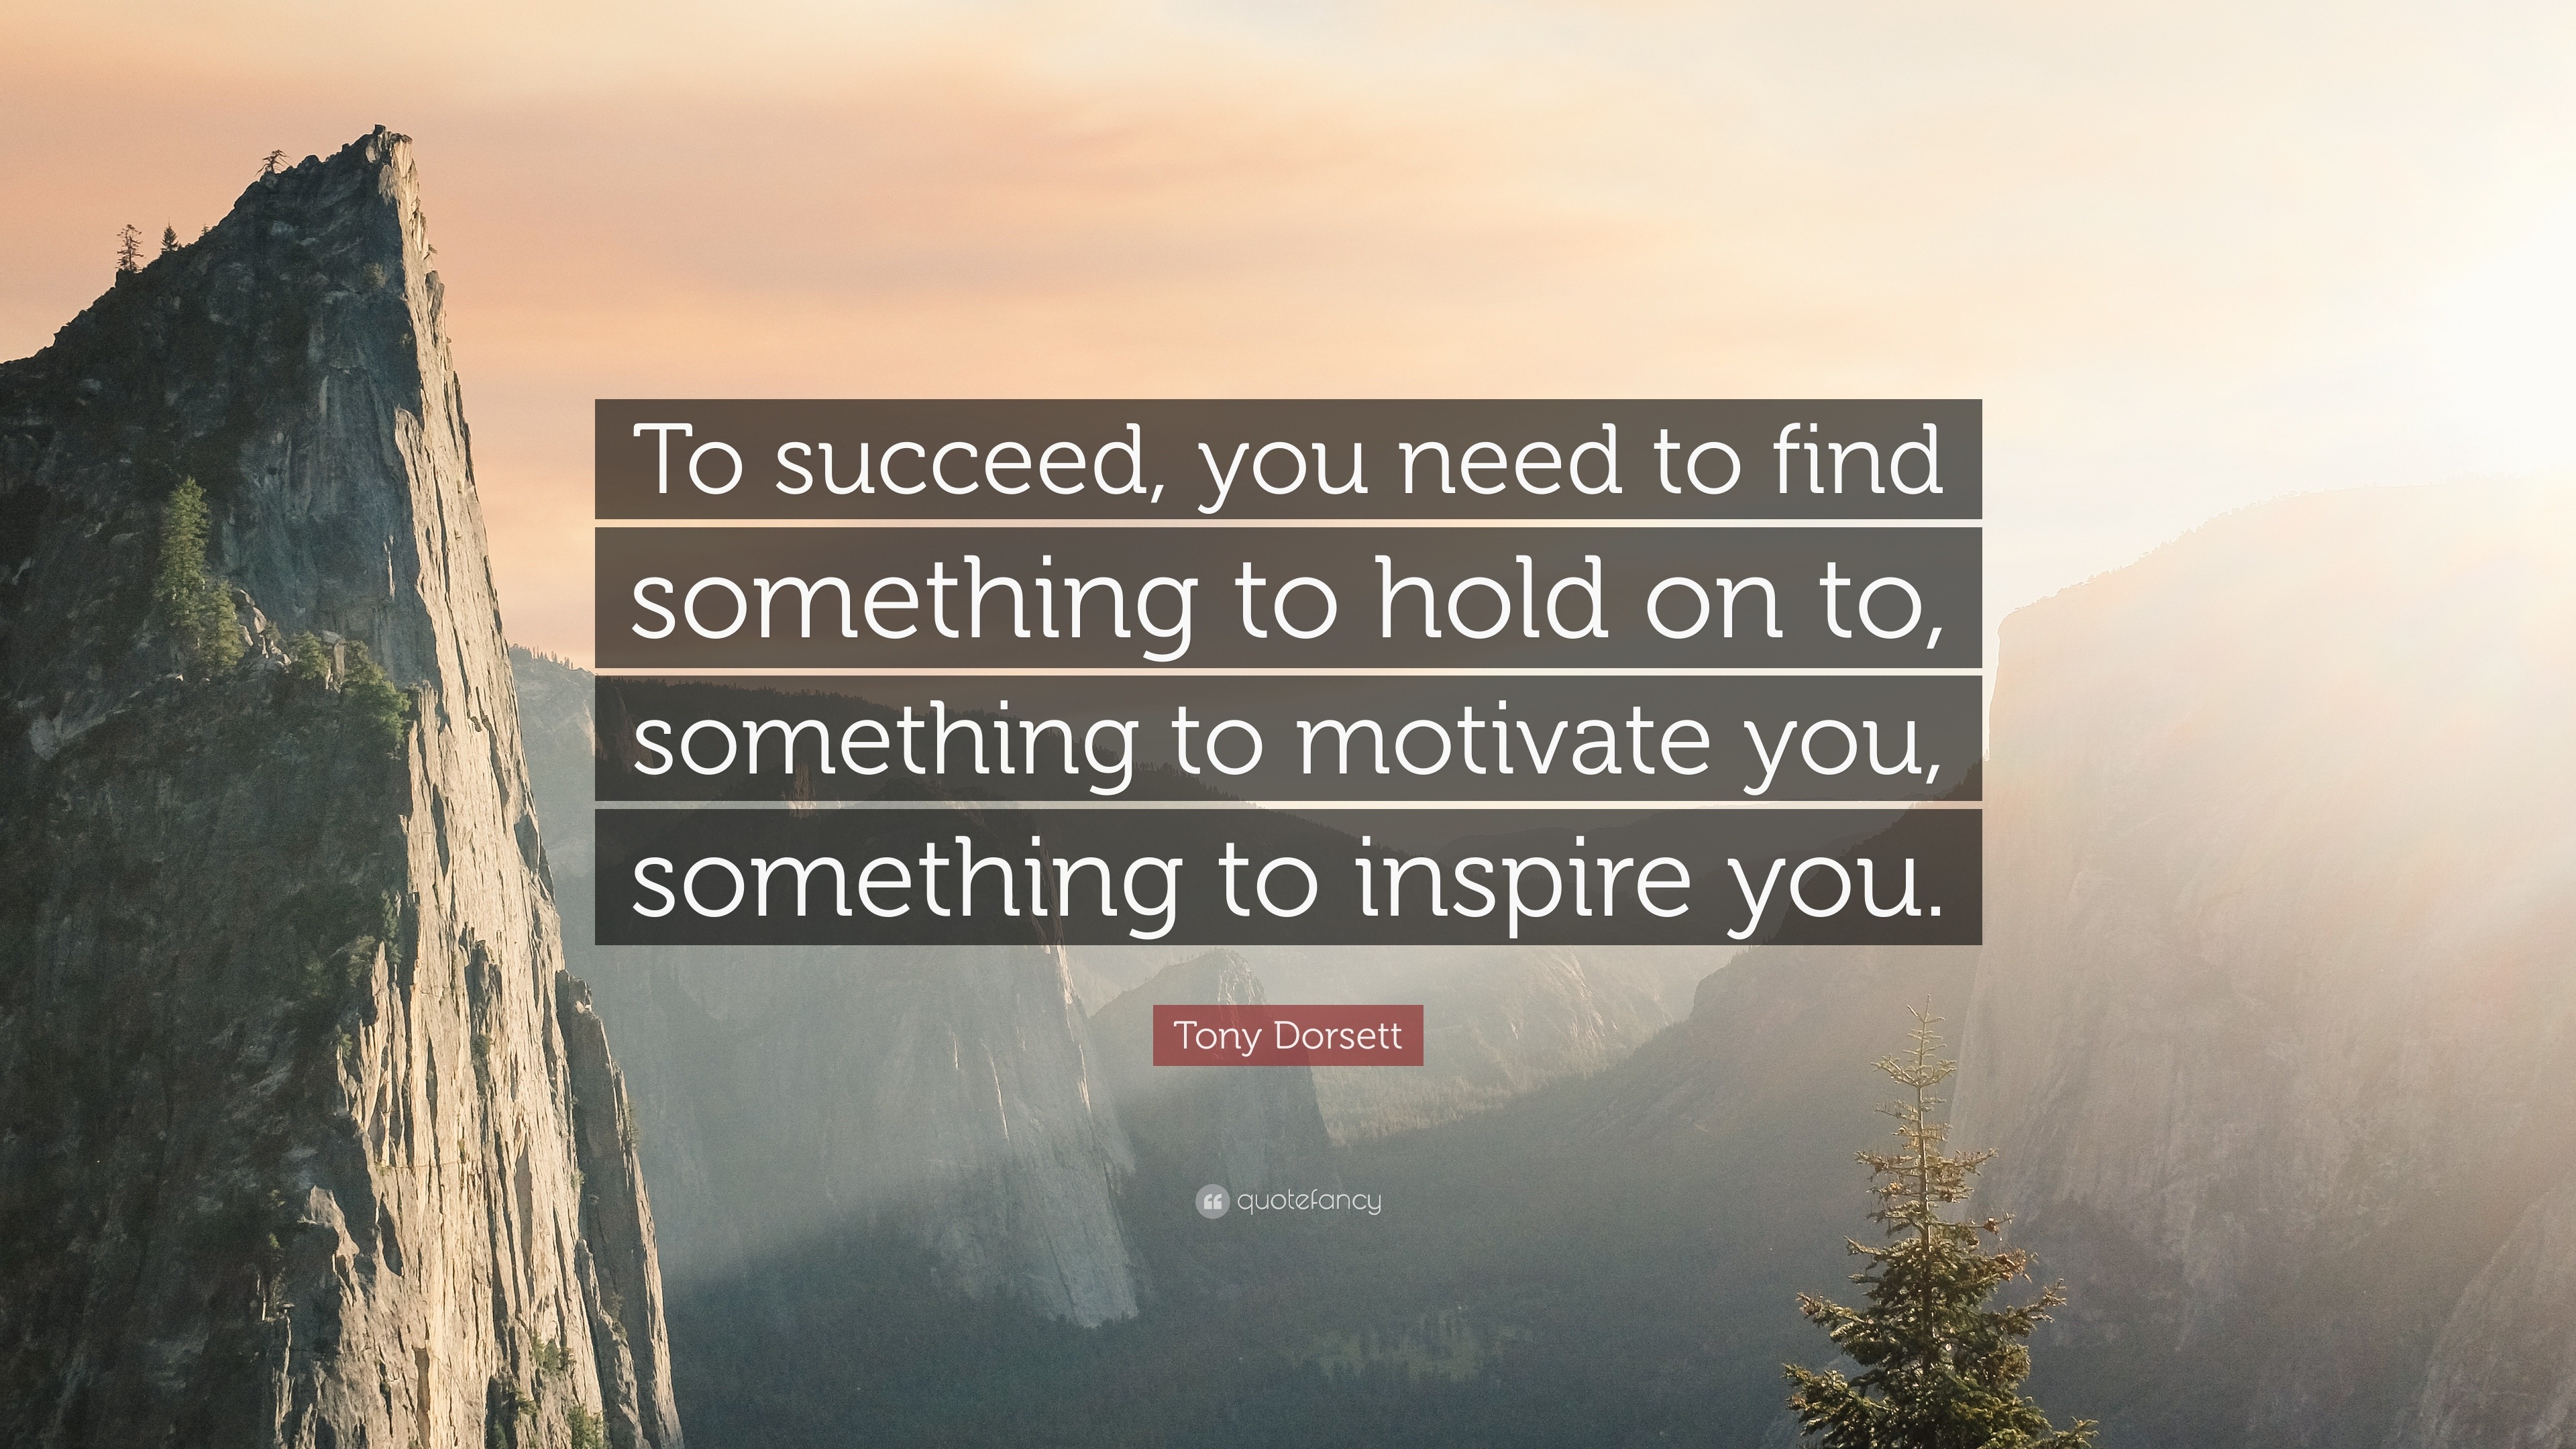 Tony Dorsett Quote: “To succeed, you need to find something to hold on